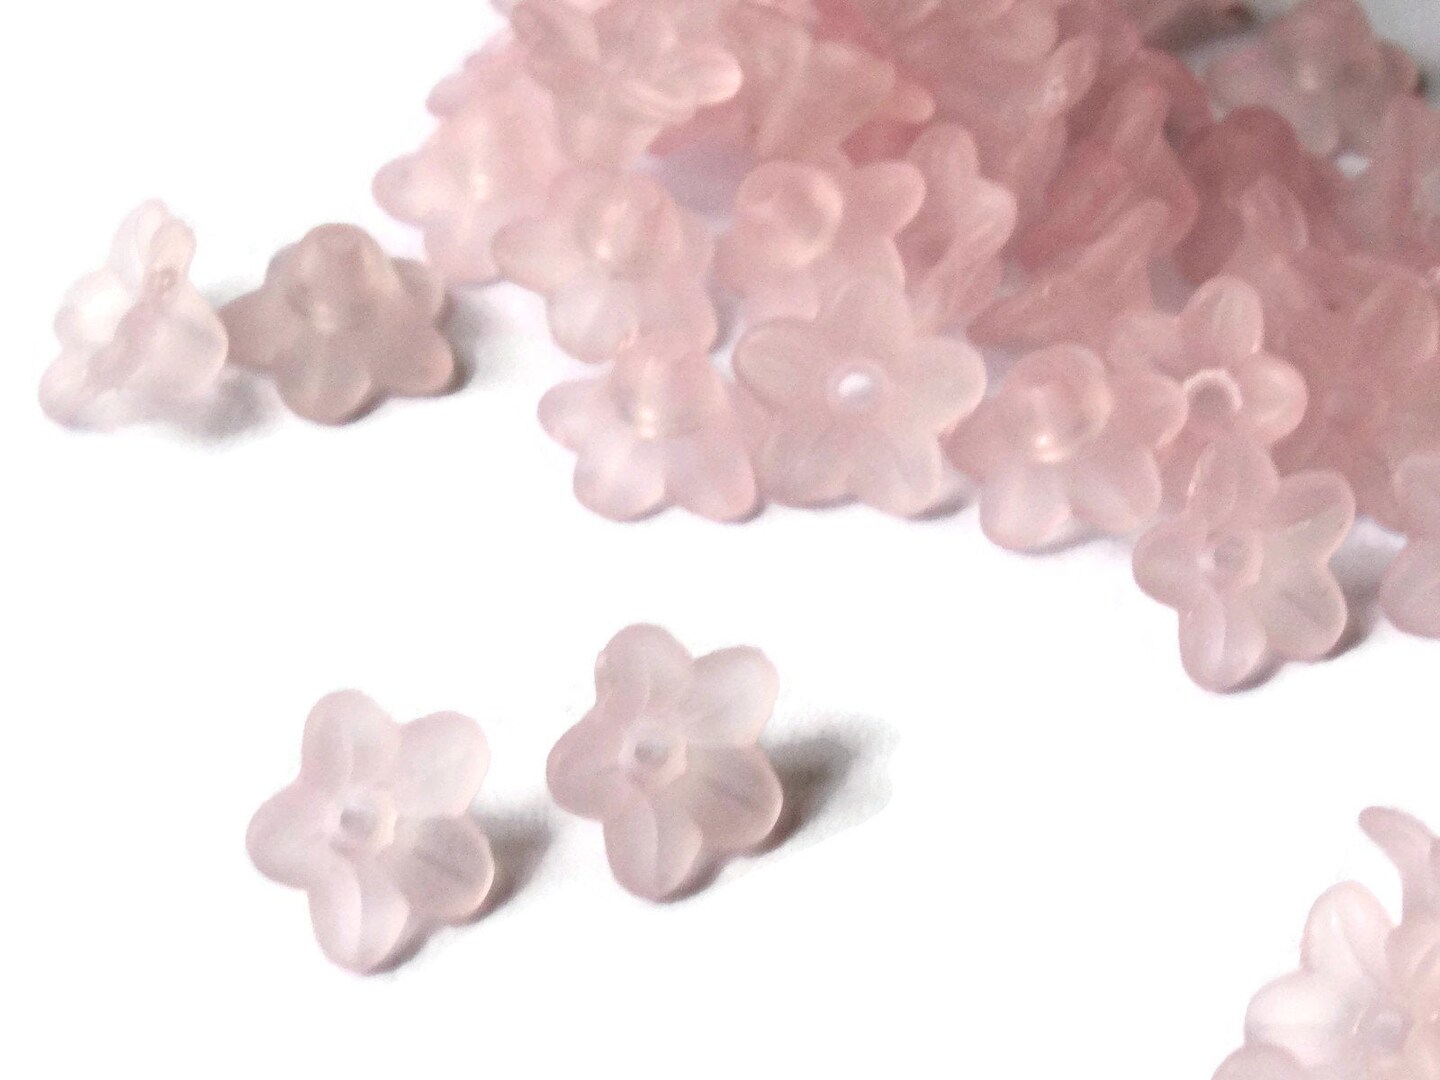 50 10mm Small Pink Flower Acrylic Beads - Lily Beads